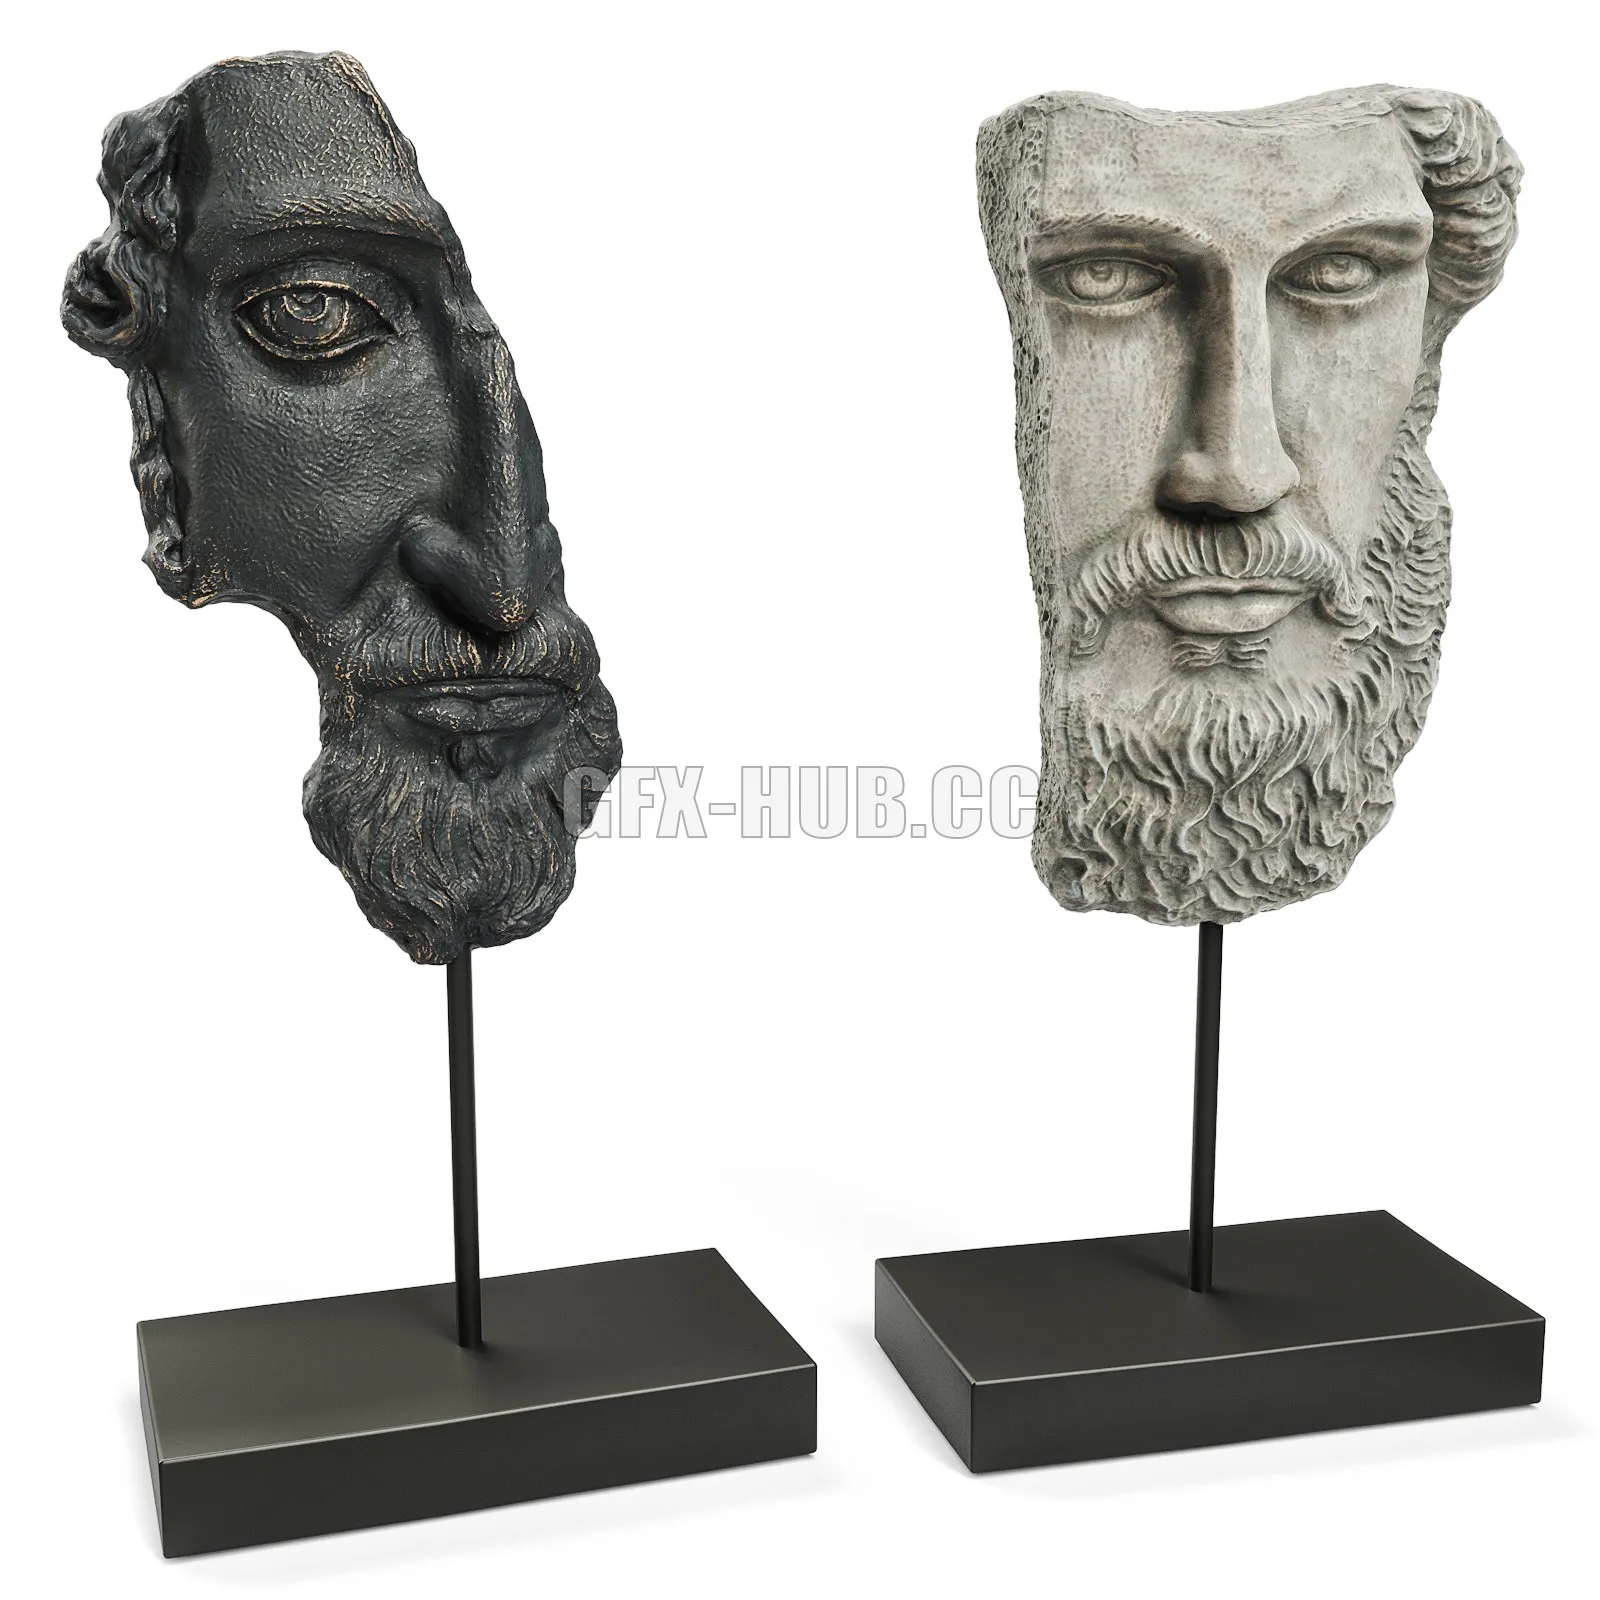 PRO MODELS – ANCIENT GREEK SCULPTURE POSEIDON and ZEUS on a stand